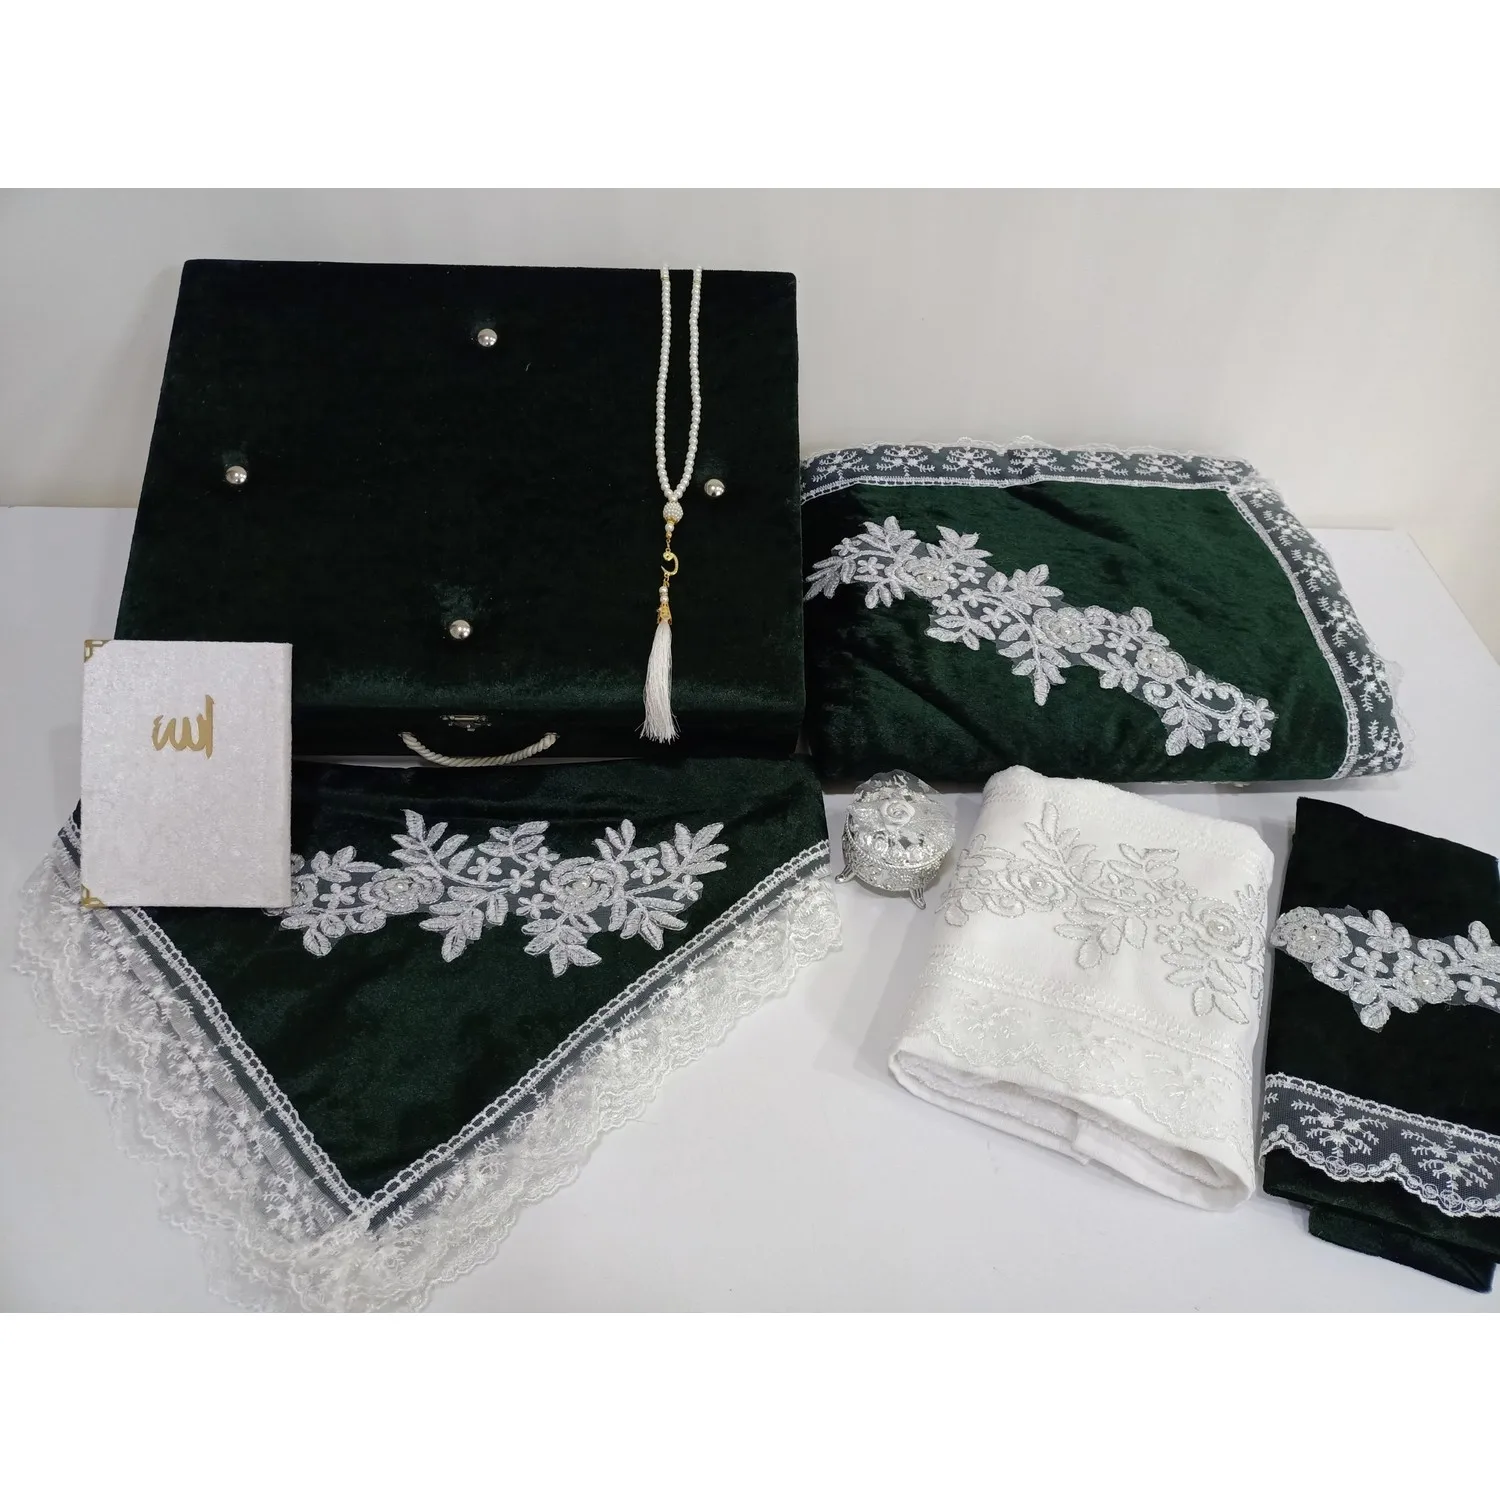 A WONDERFUL GIFT 8 Pieces Rugs Set With Emerald Chest Prayer Rug Set Dowry   MUSLIM PRAYER COVER EASY TO USE  FREE SHİPPİNG